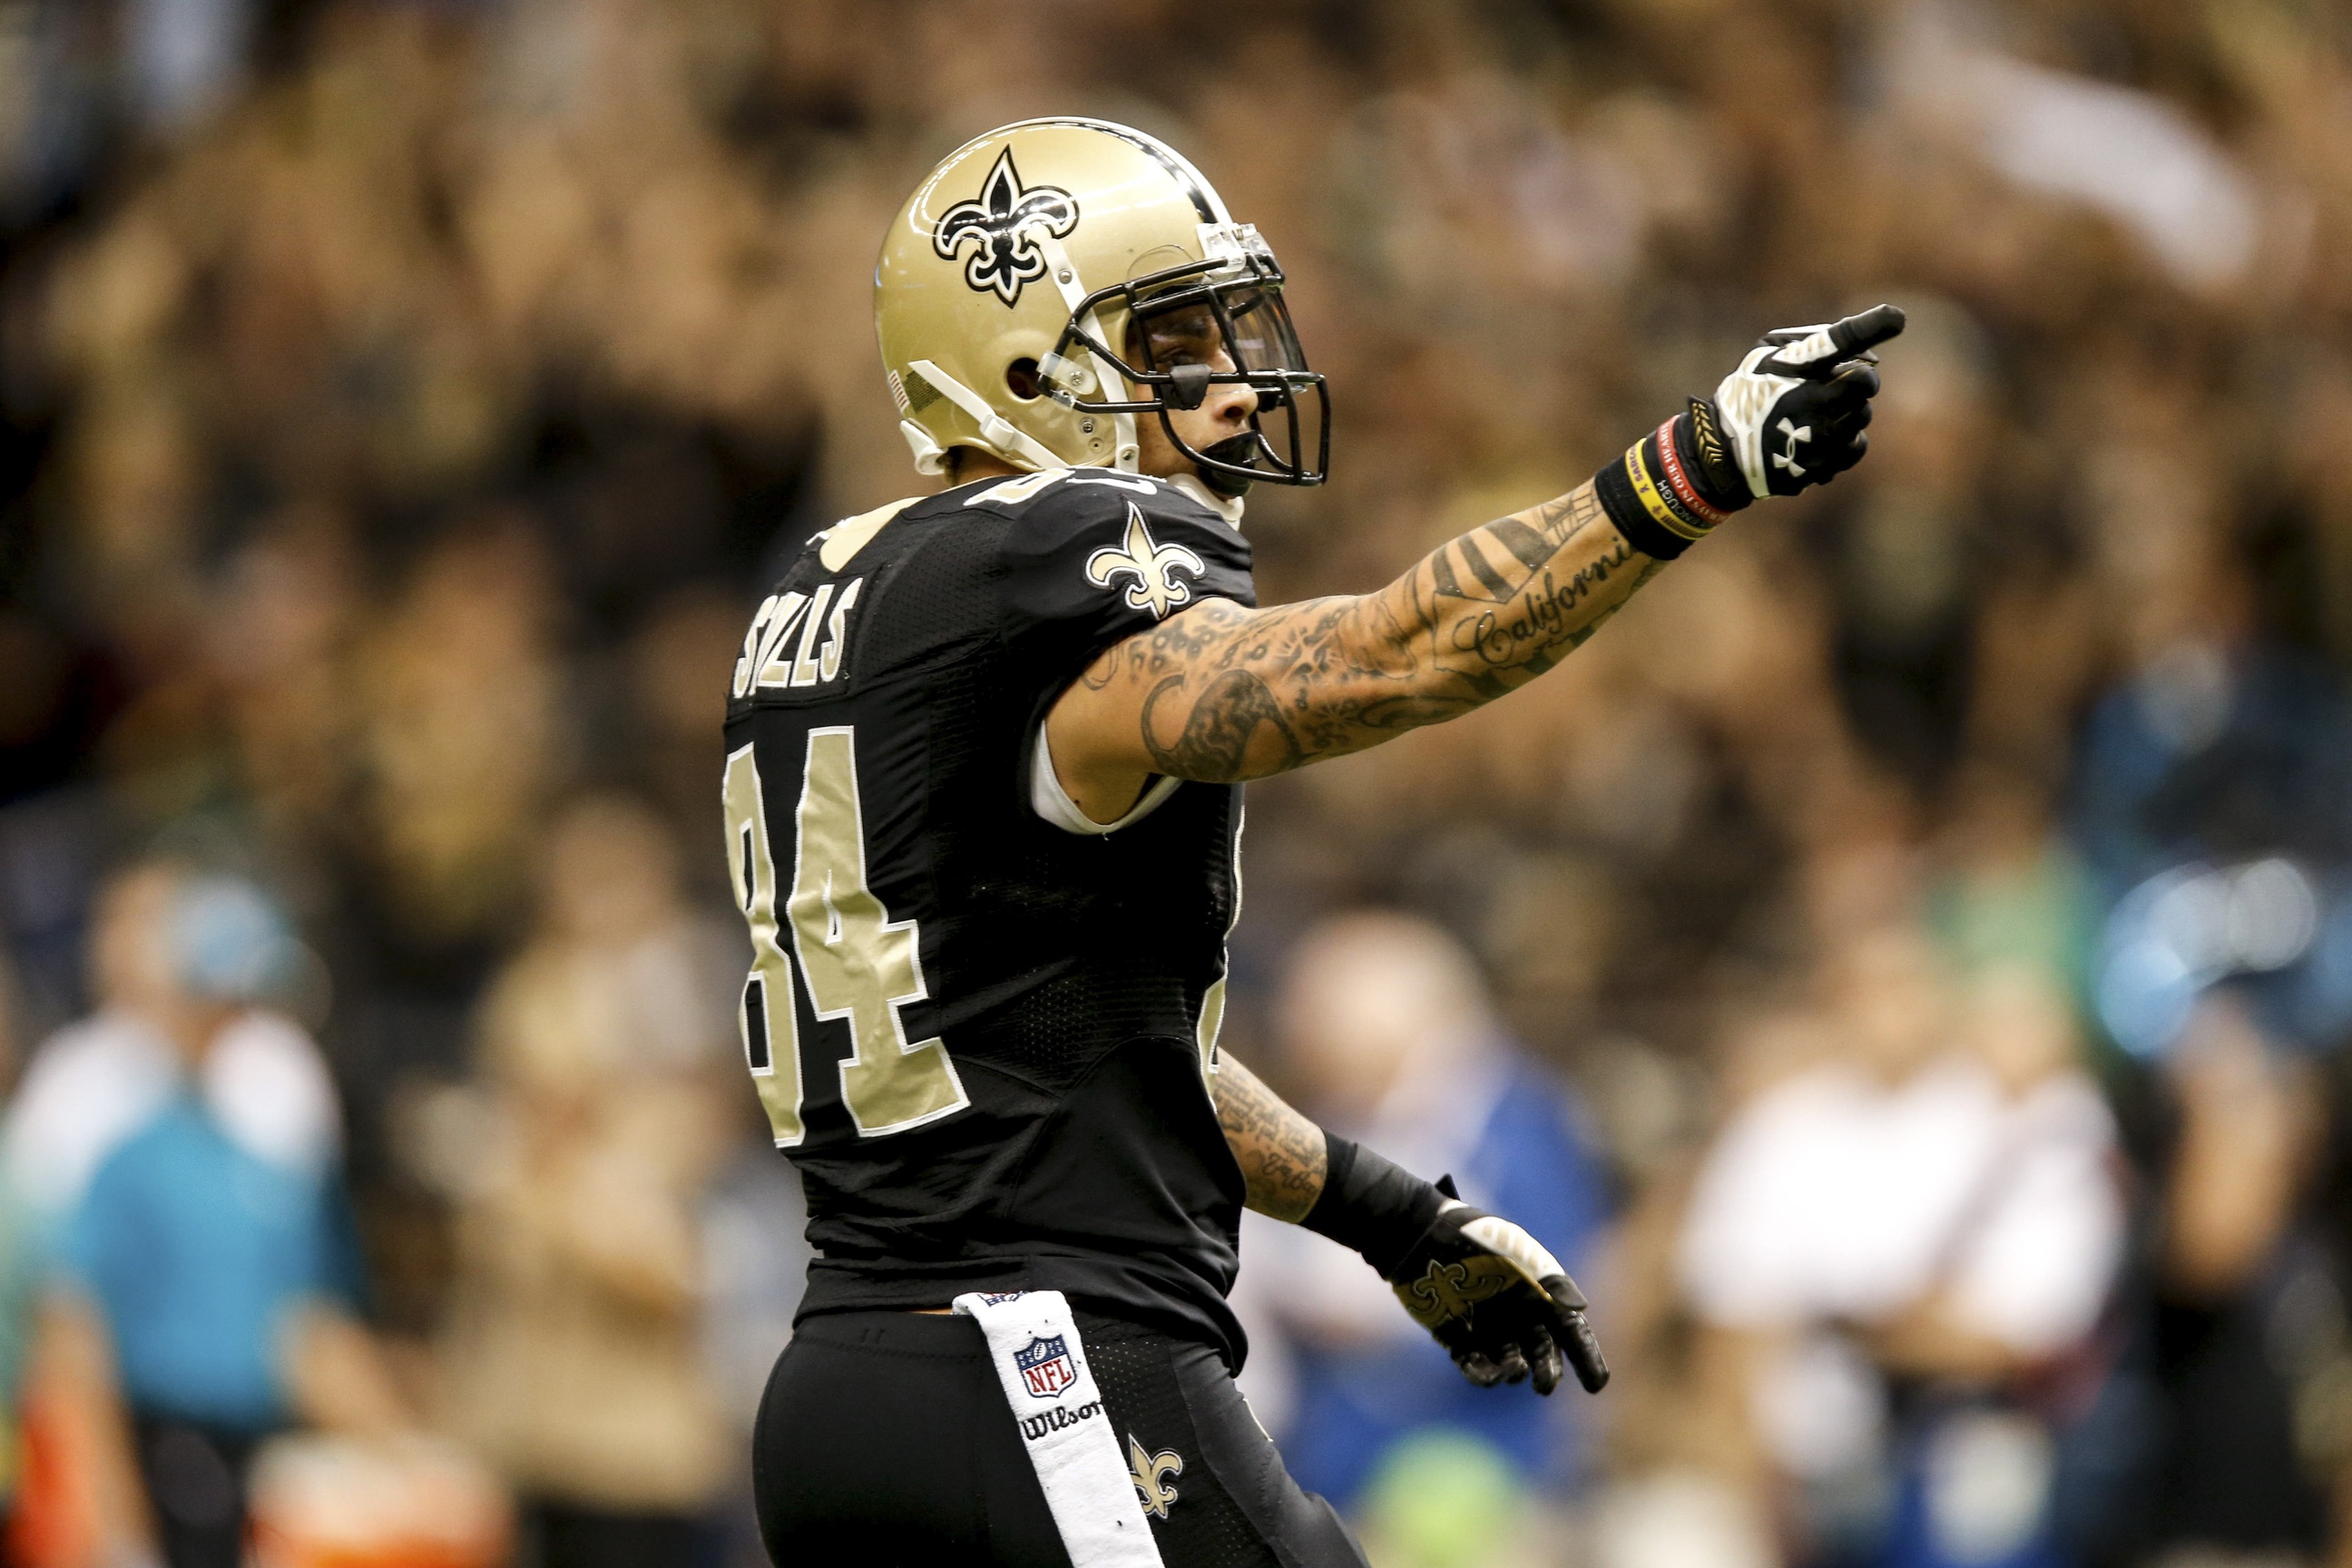 Courtesy of USA Today: Kenny Stills brings more upside and a lower price tag than Mike Wallace.